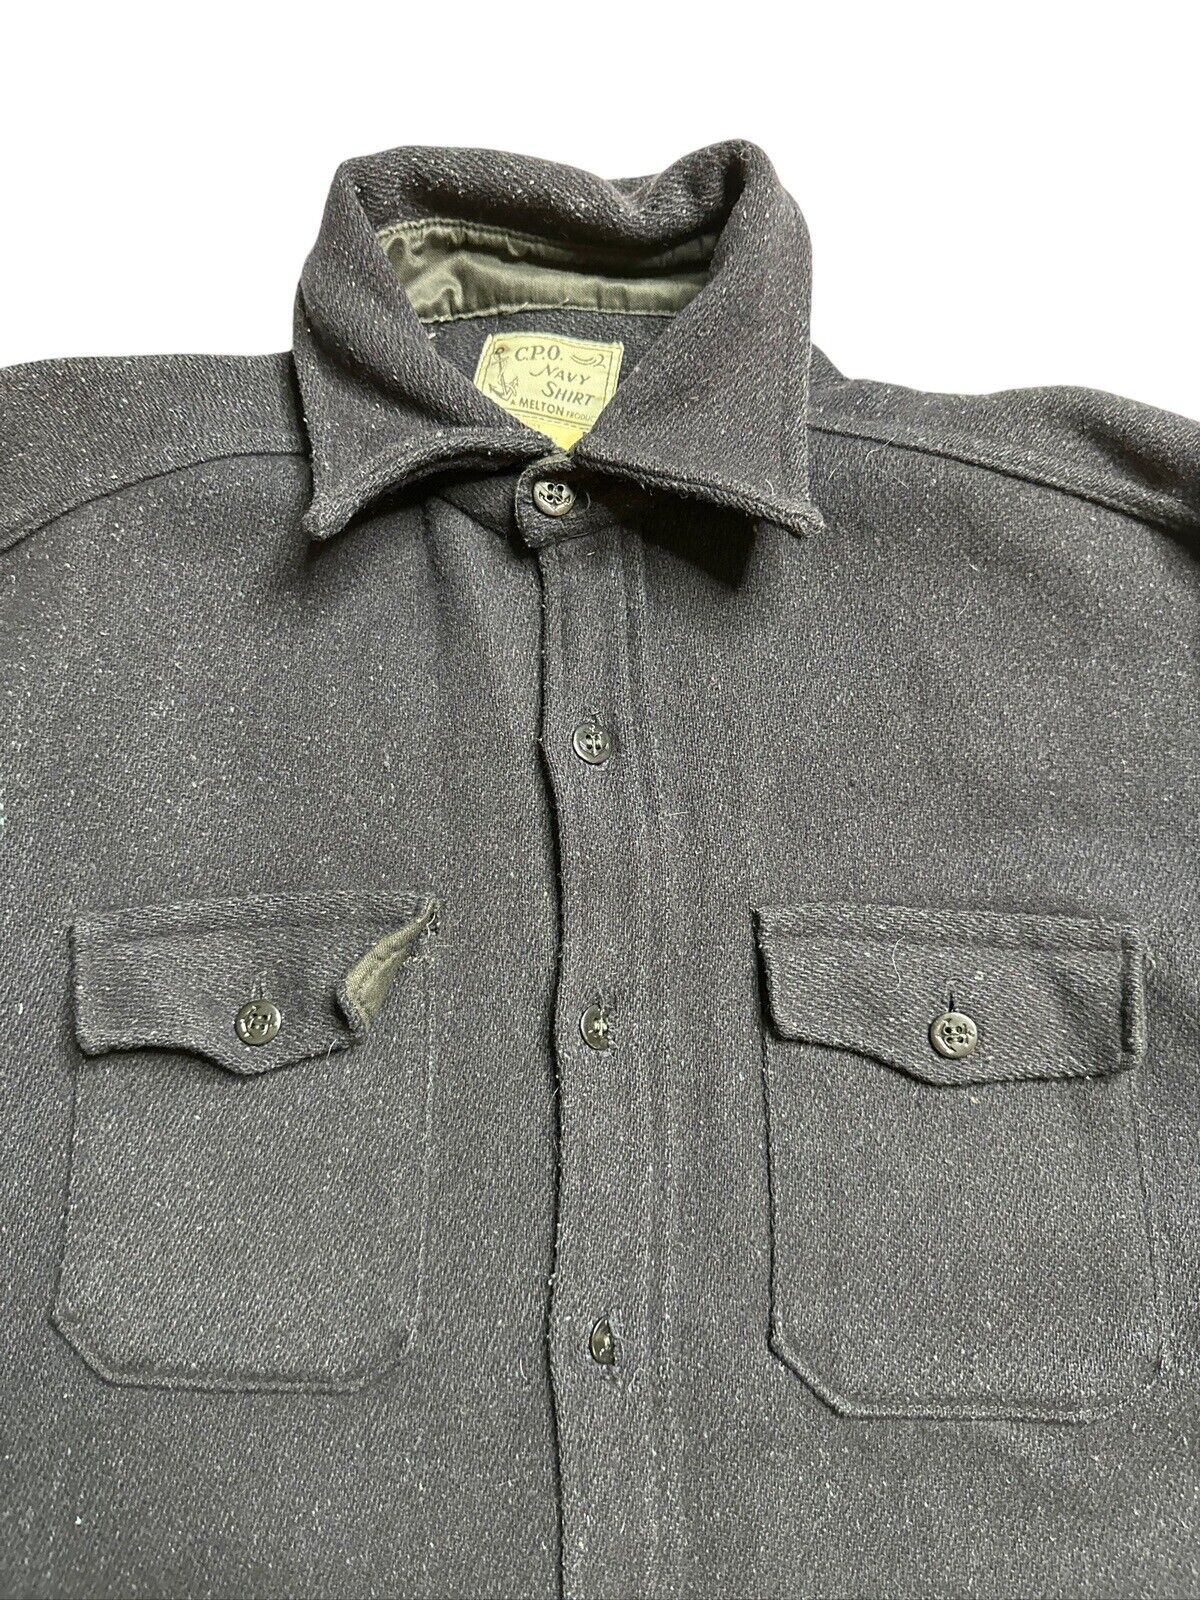 Vintage WW2 40s 50s Us Navy USN CPO Wool Buttonup Shirt Large L